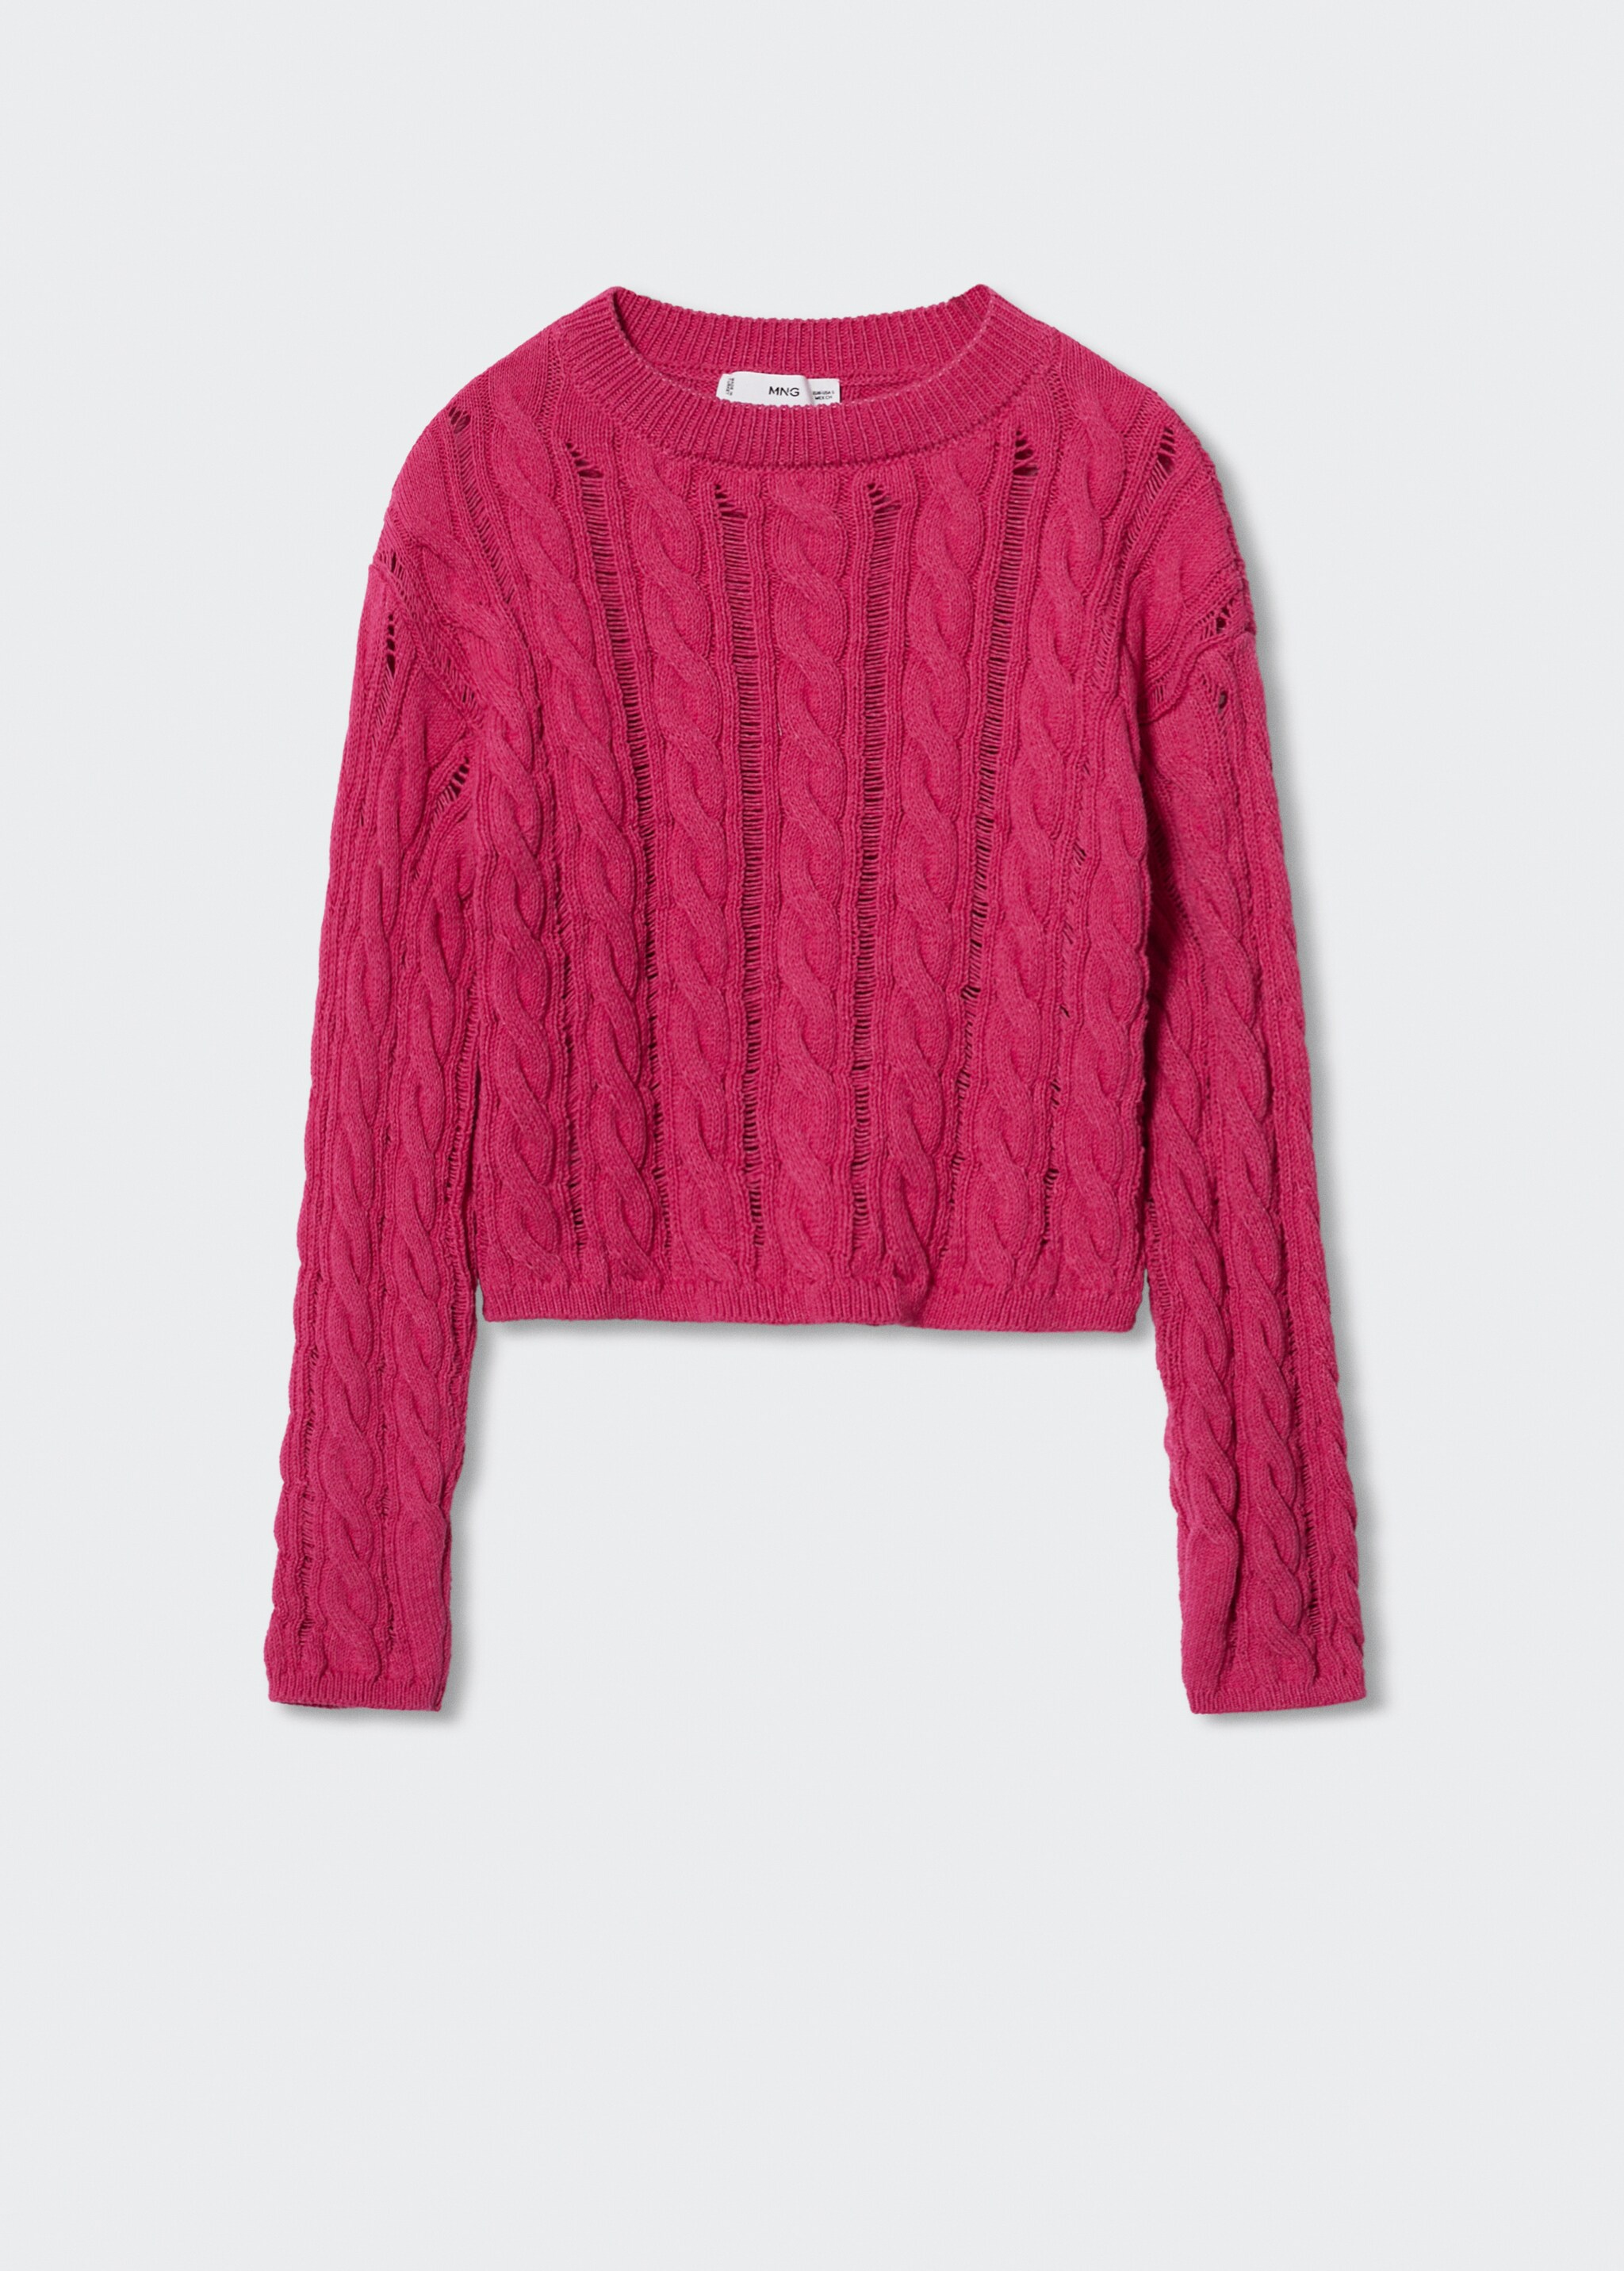 Openwork cropped sweater - Article without model